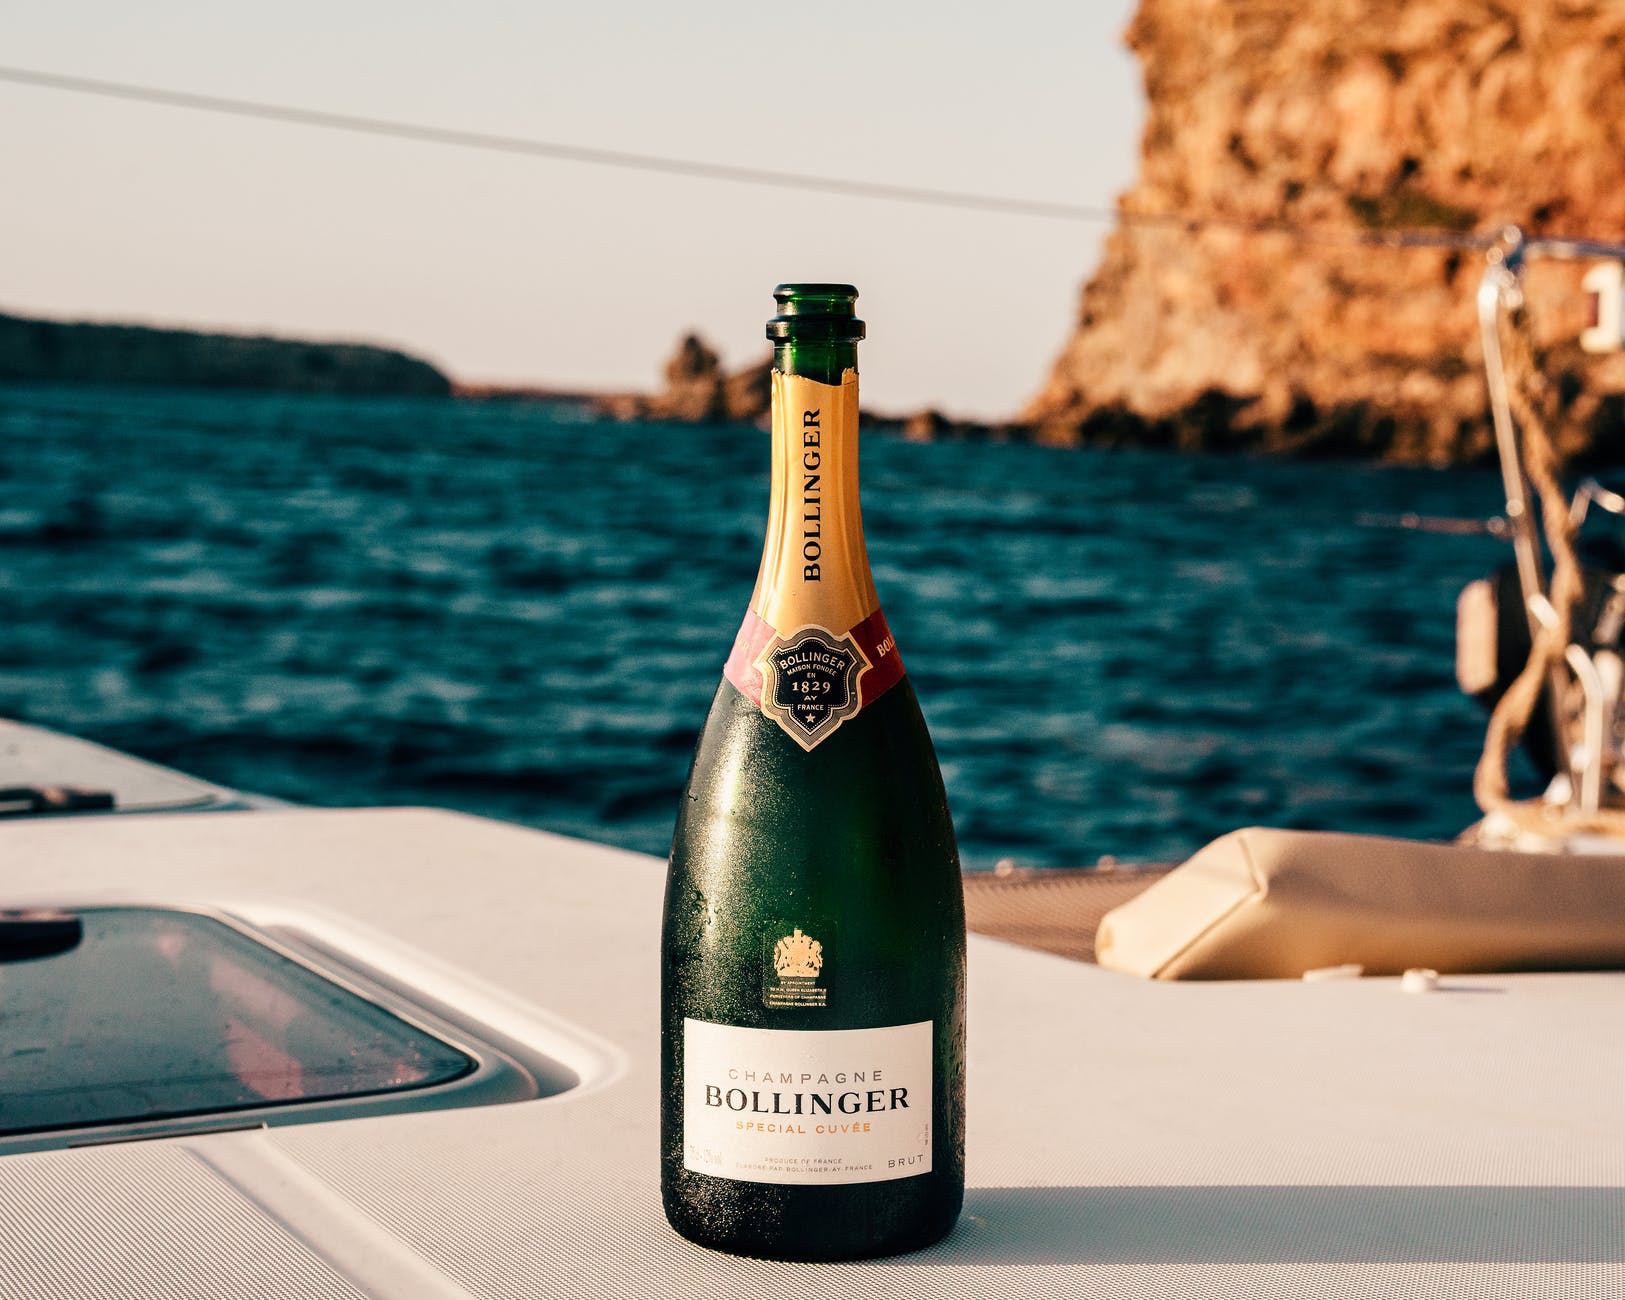 A bottle of Bollinger champagne on the deck of a yacht